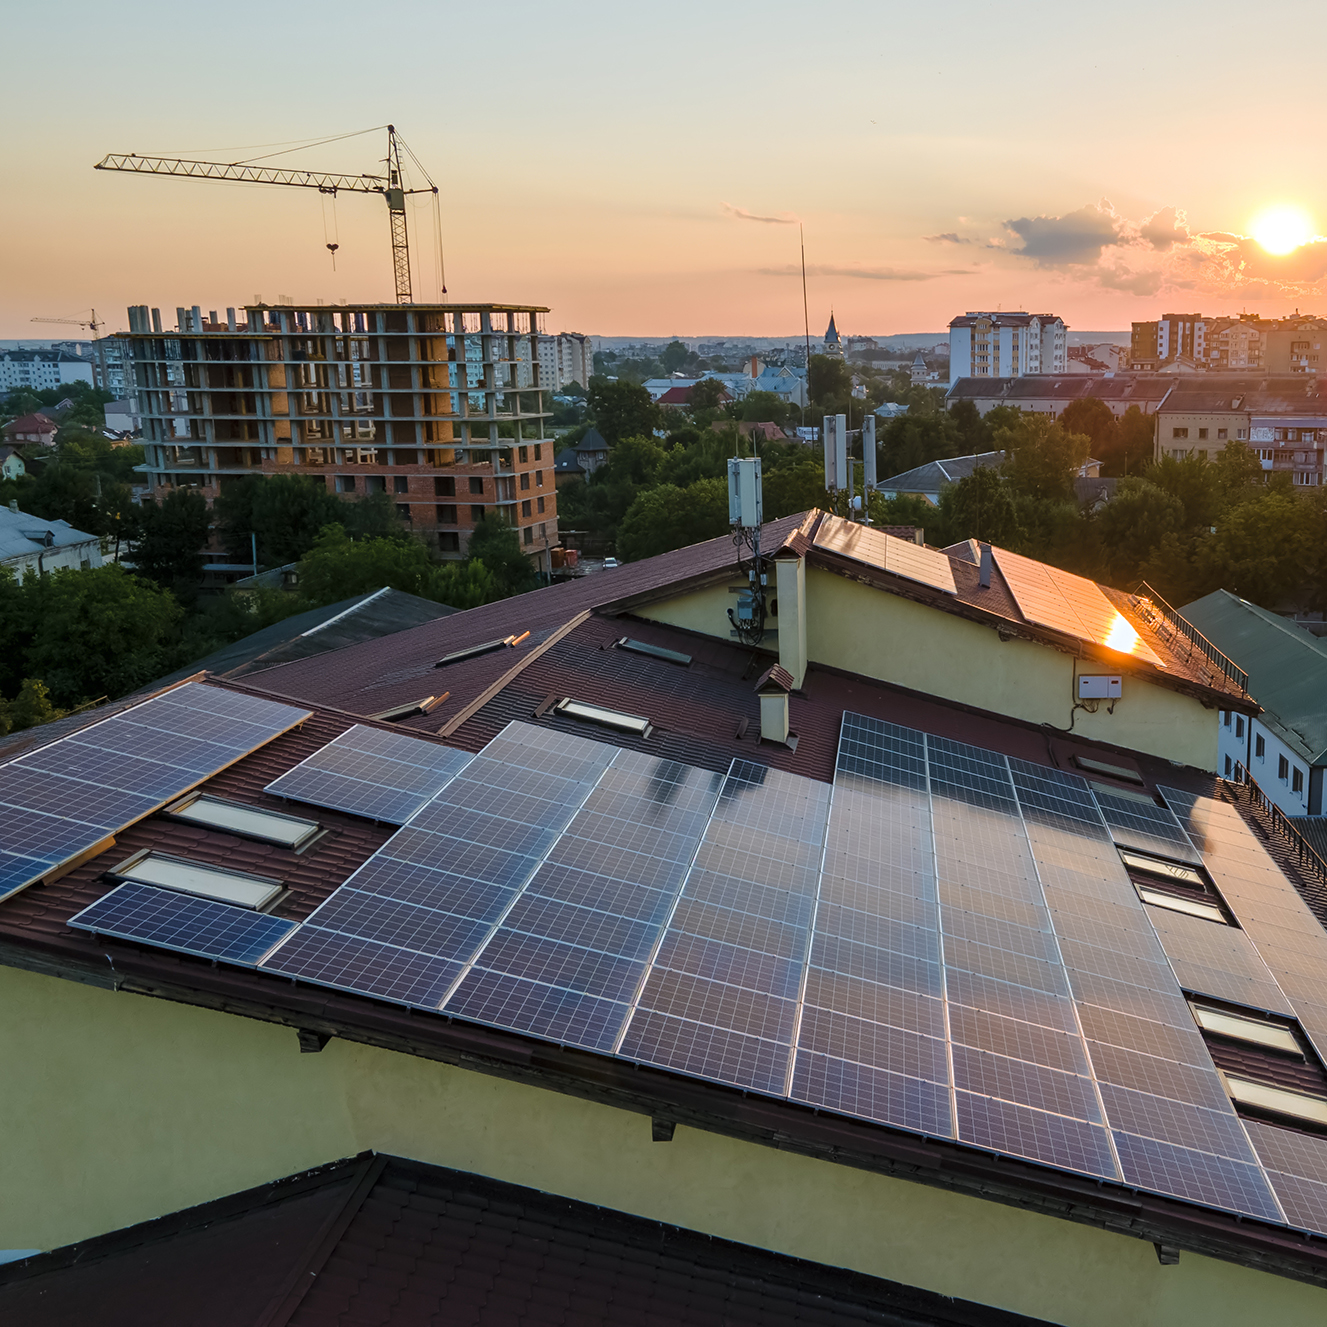 blue-photovoltaic-solar-panels-mounted-on-building-roof-for-producing-clean-ecological-electricity-at-sunset-production-of-renewable-energy-concept